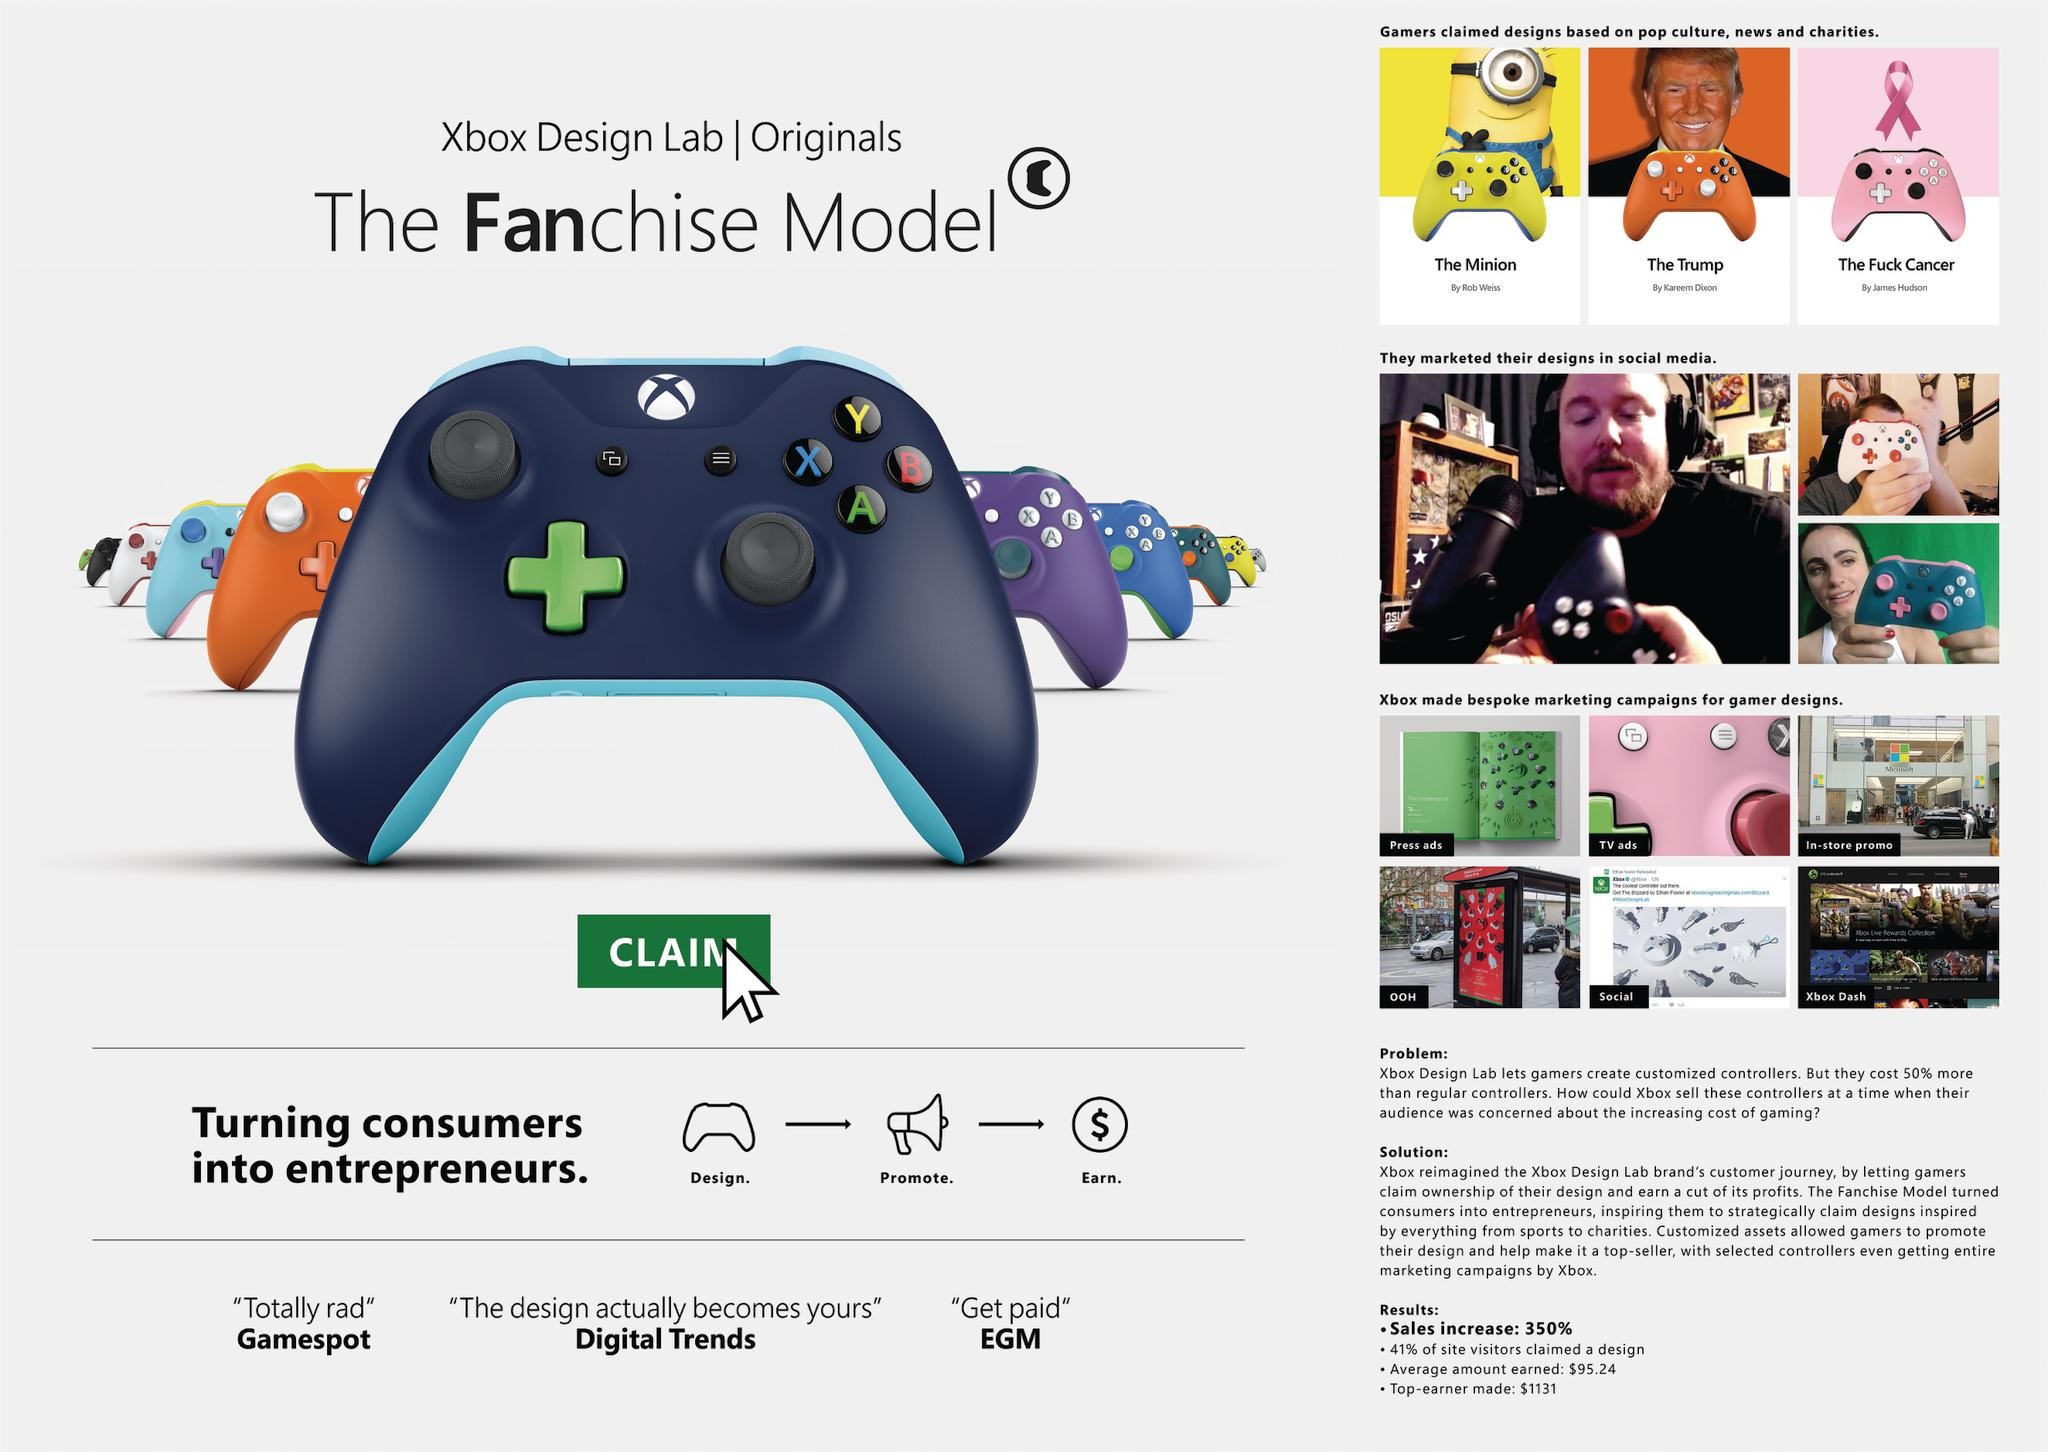 'Xbox Design Lab Originals: The Fanchise Model' – Turning Fans into Fanchisees